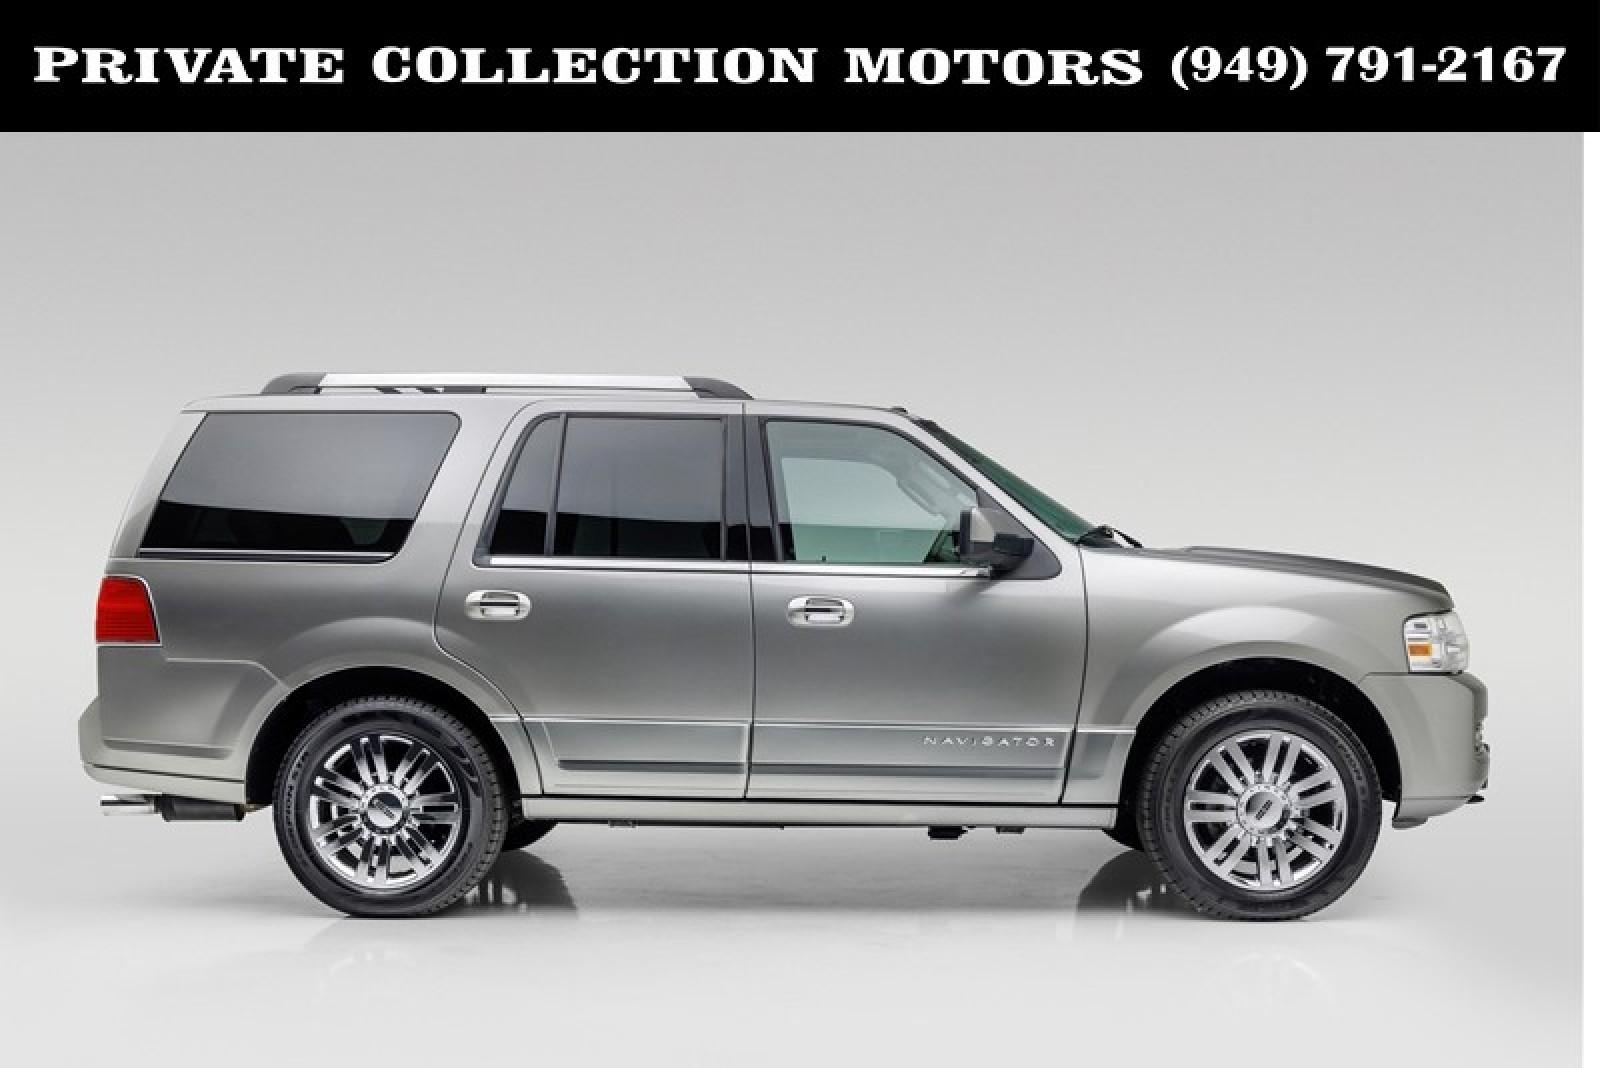 Used 2008 Lincoln Navigator For Sale (Sold) | Private Collection 